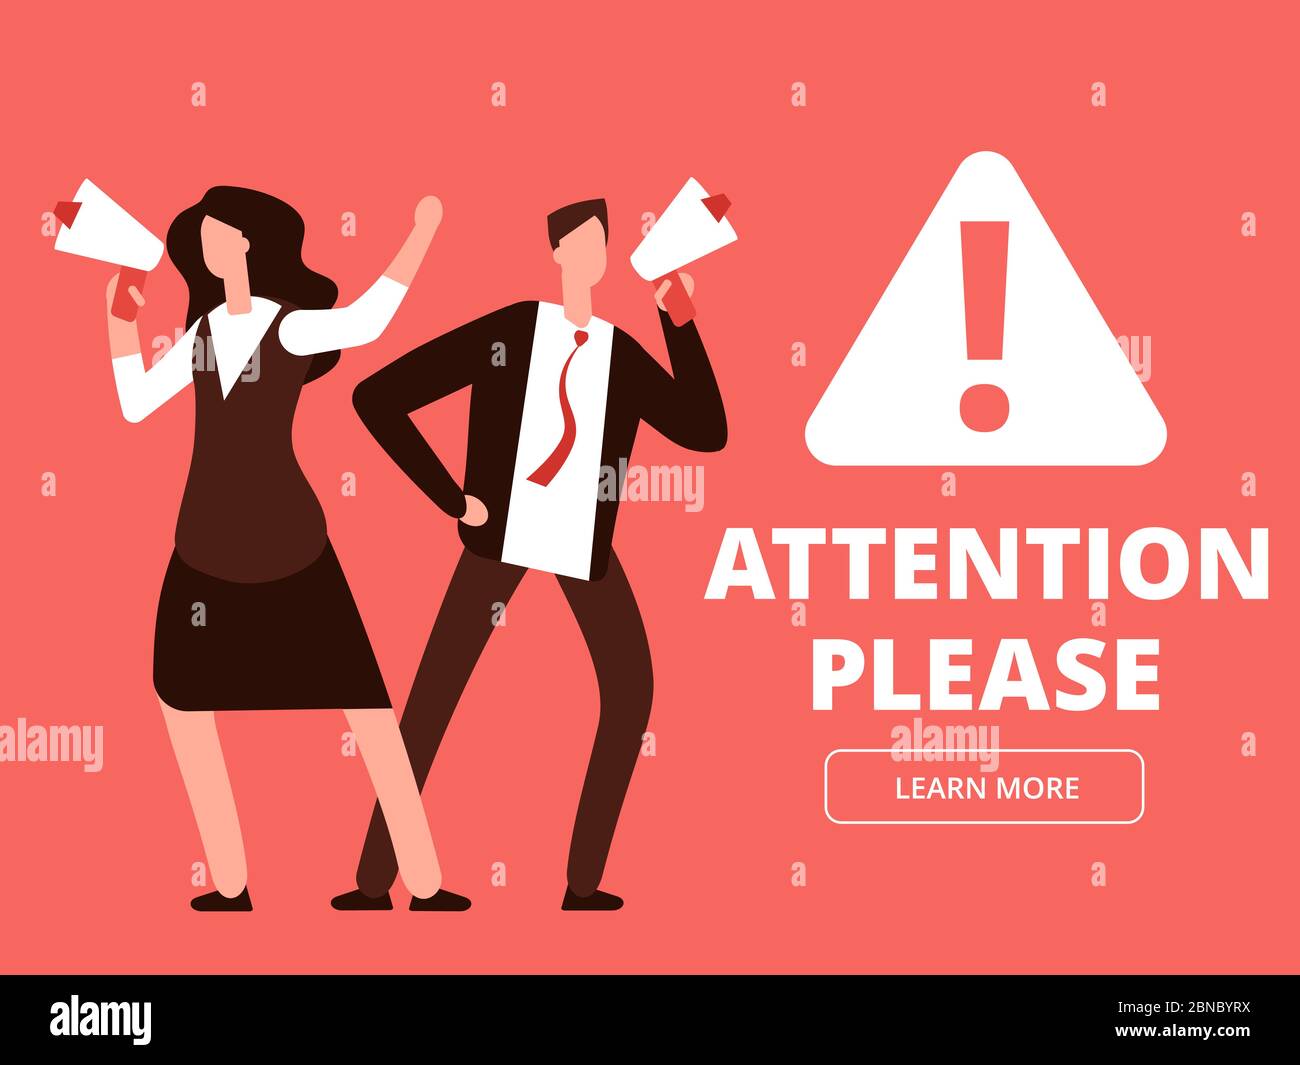 Attention vector banner or web page template with cartoon man and woman with megaphones. Illustration of attention please, man with megaphone and message Stock Vector